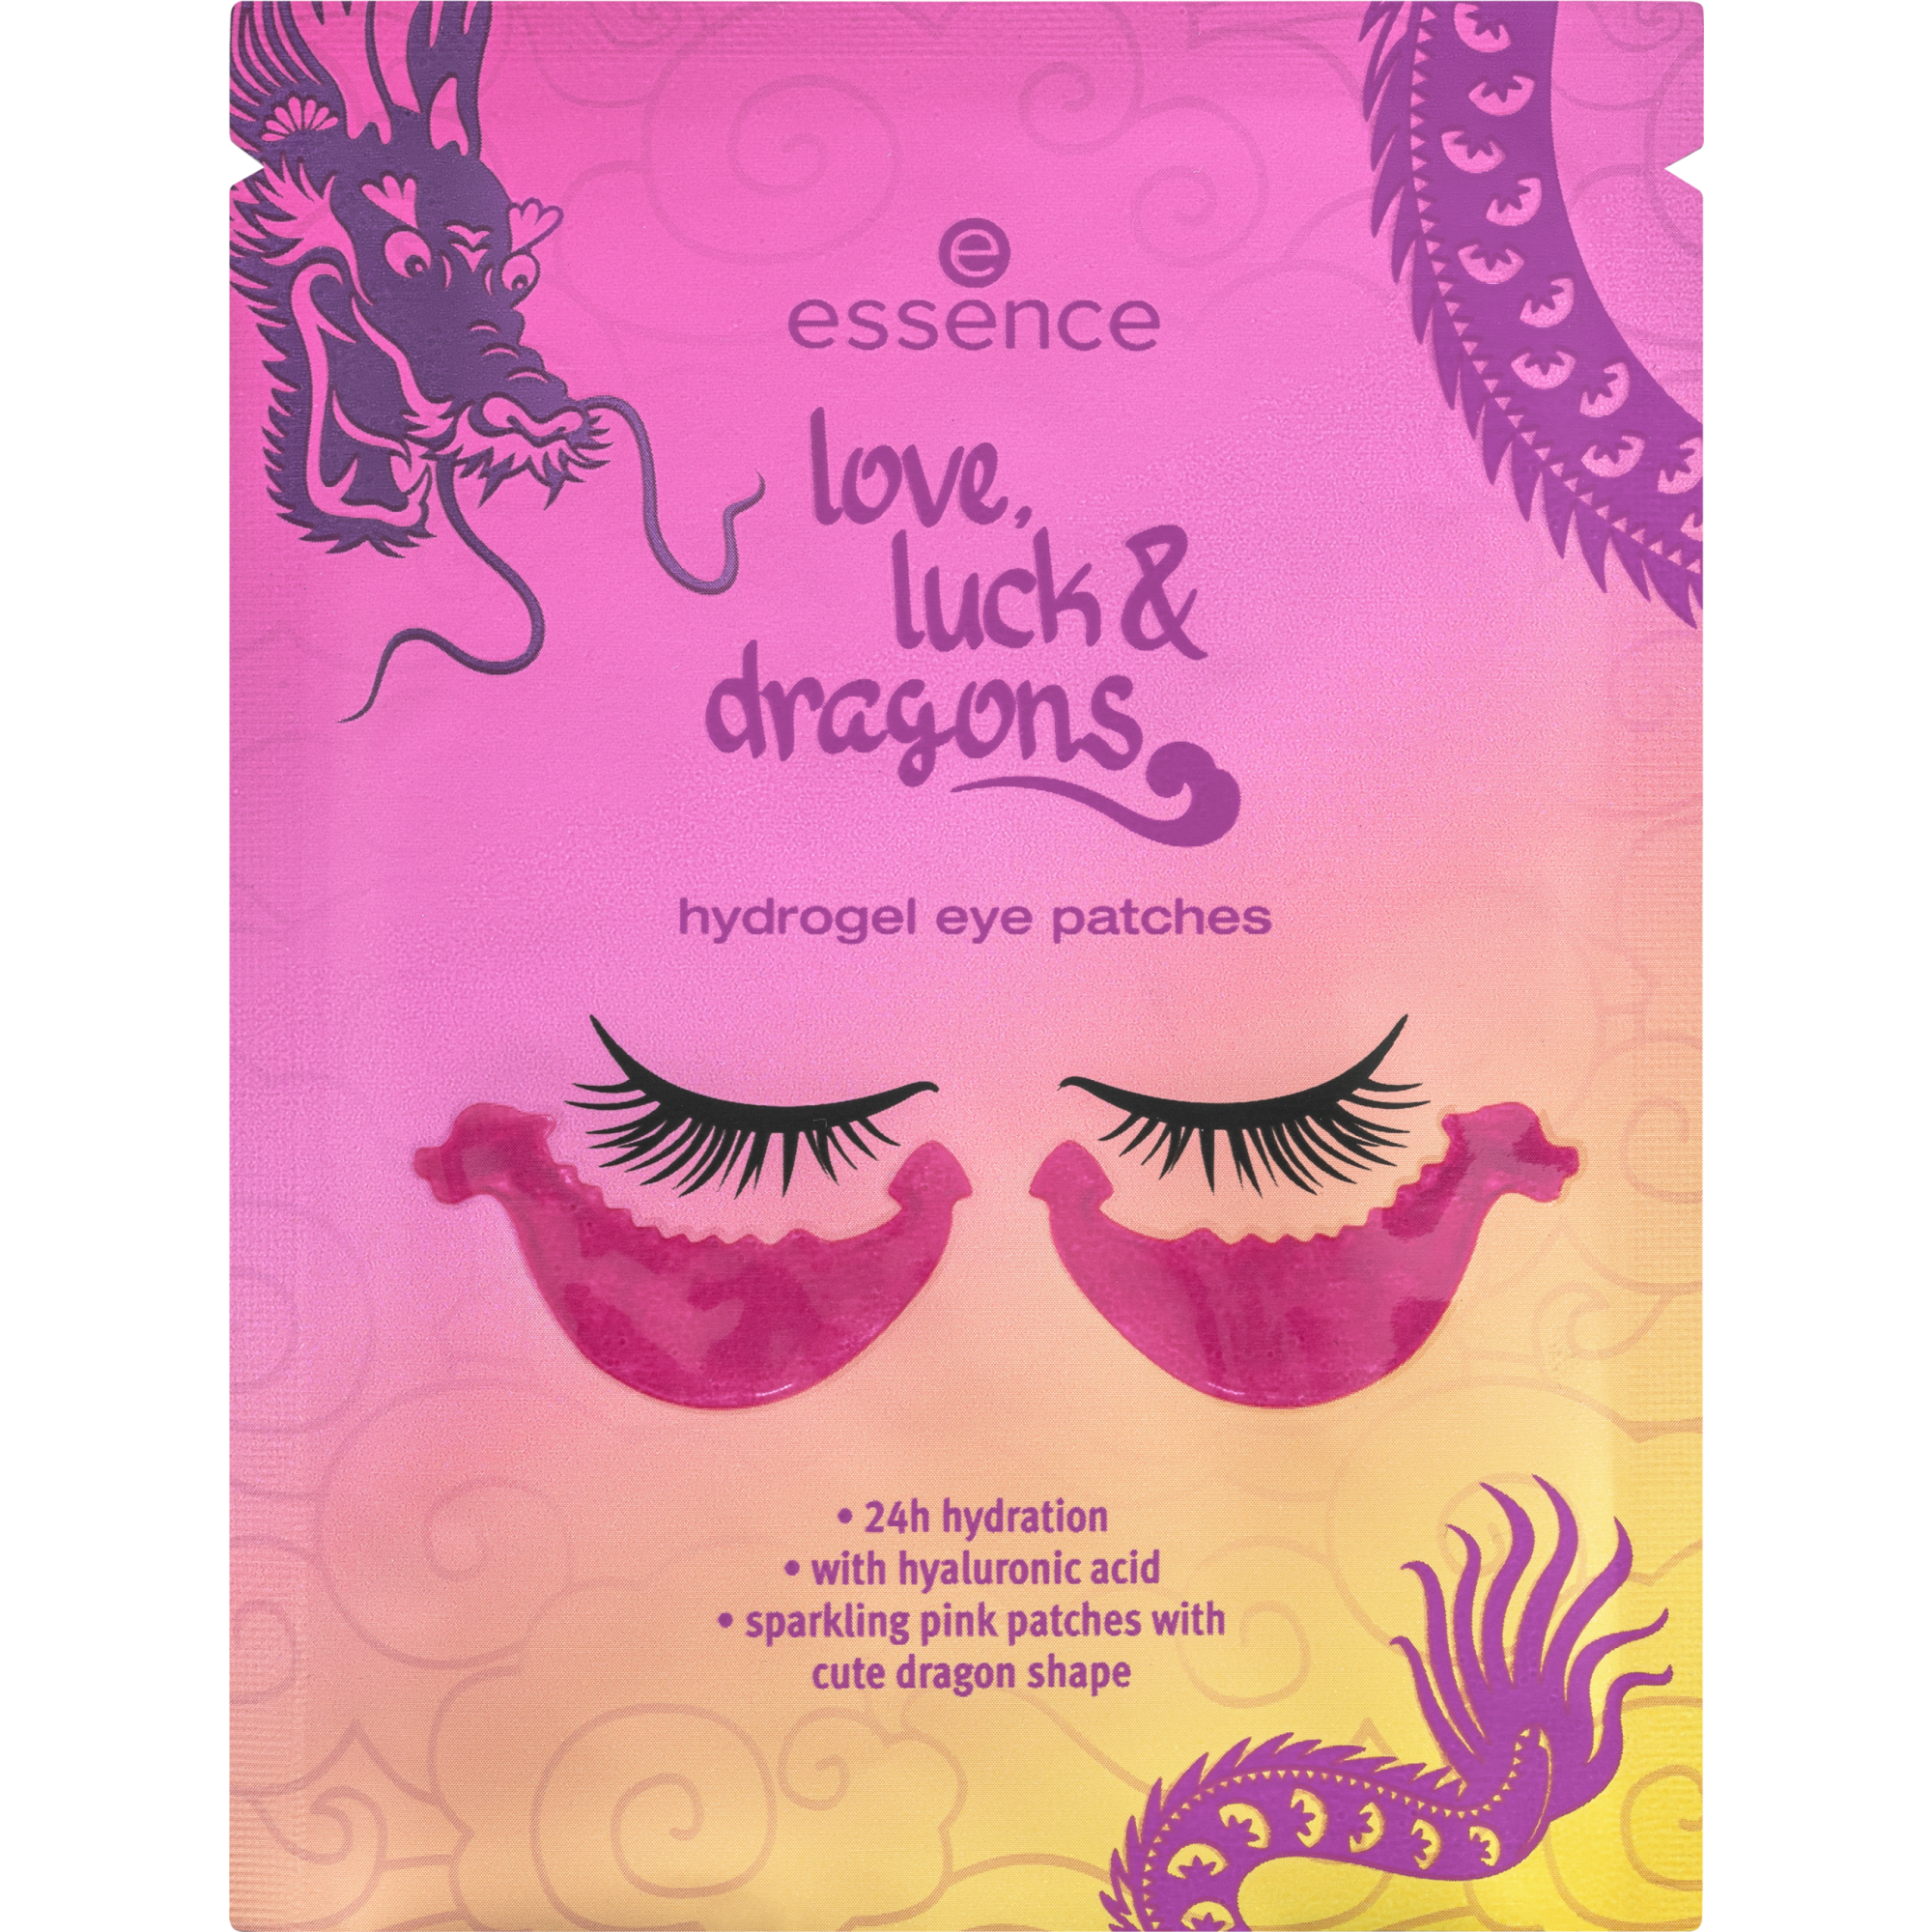 love, luck & dragons hydrogel eye patches